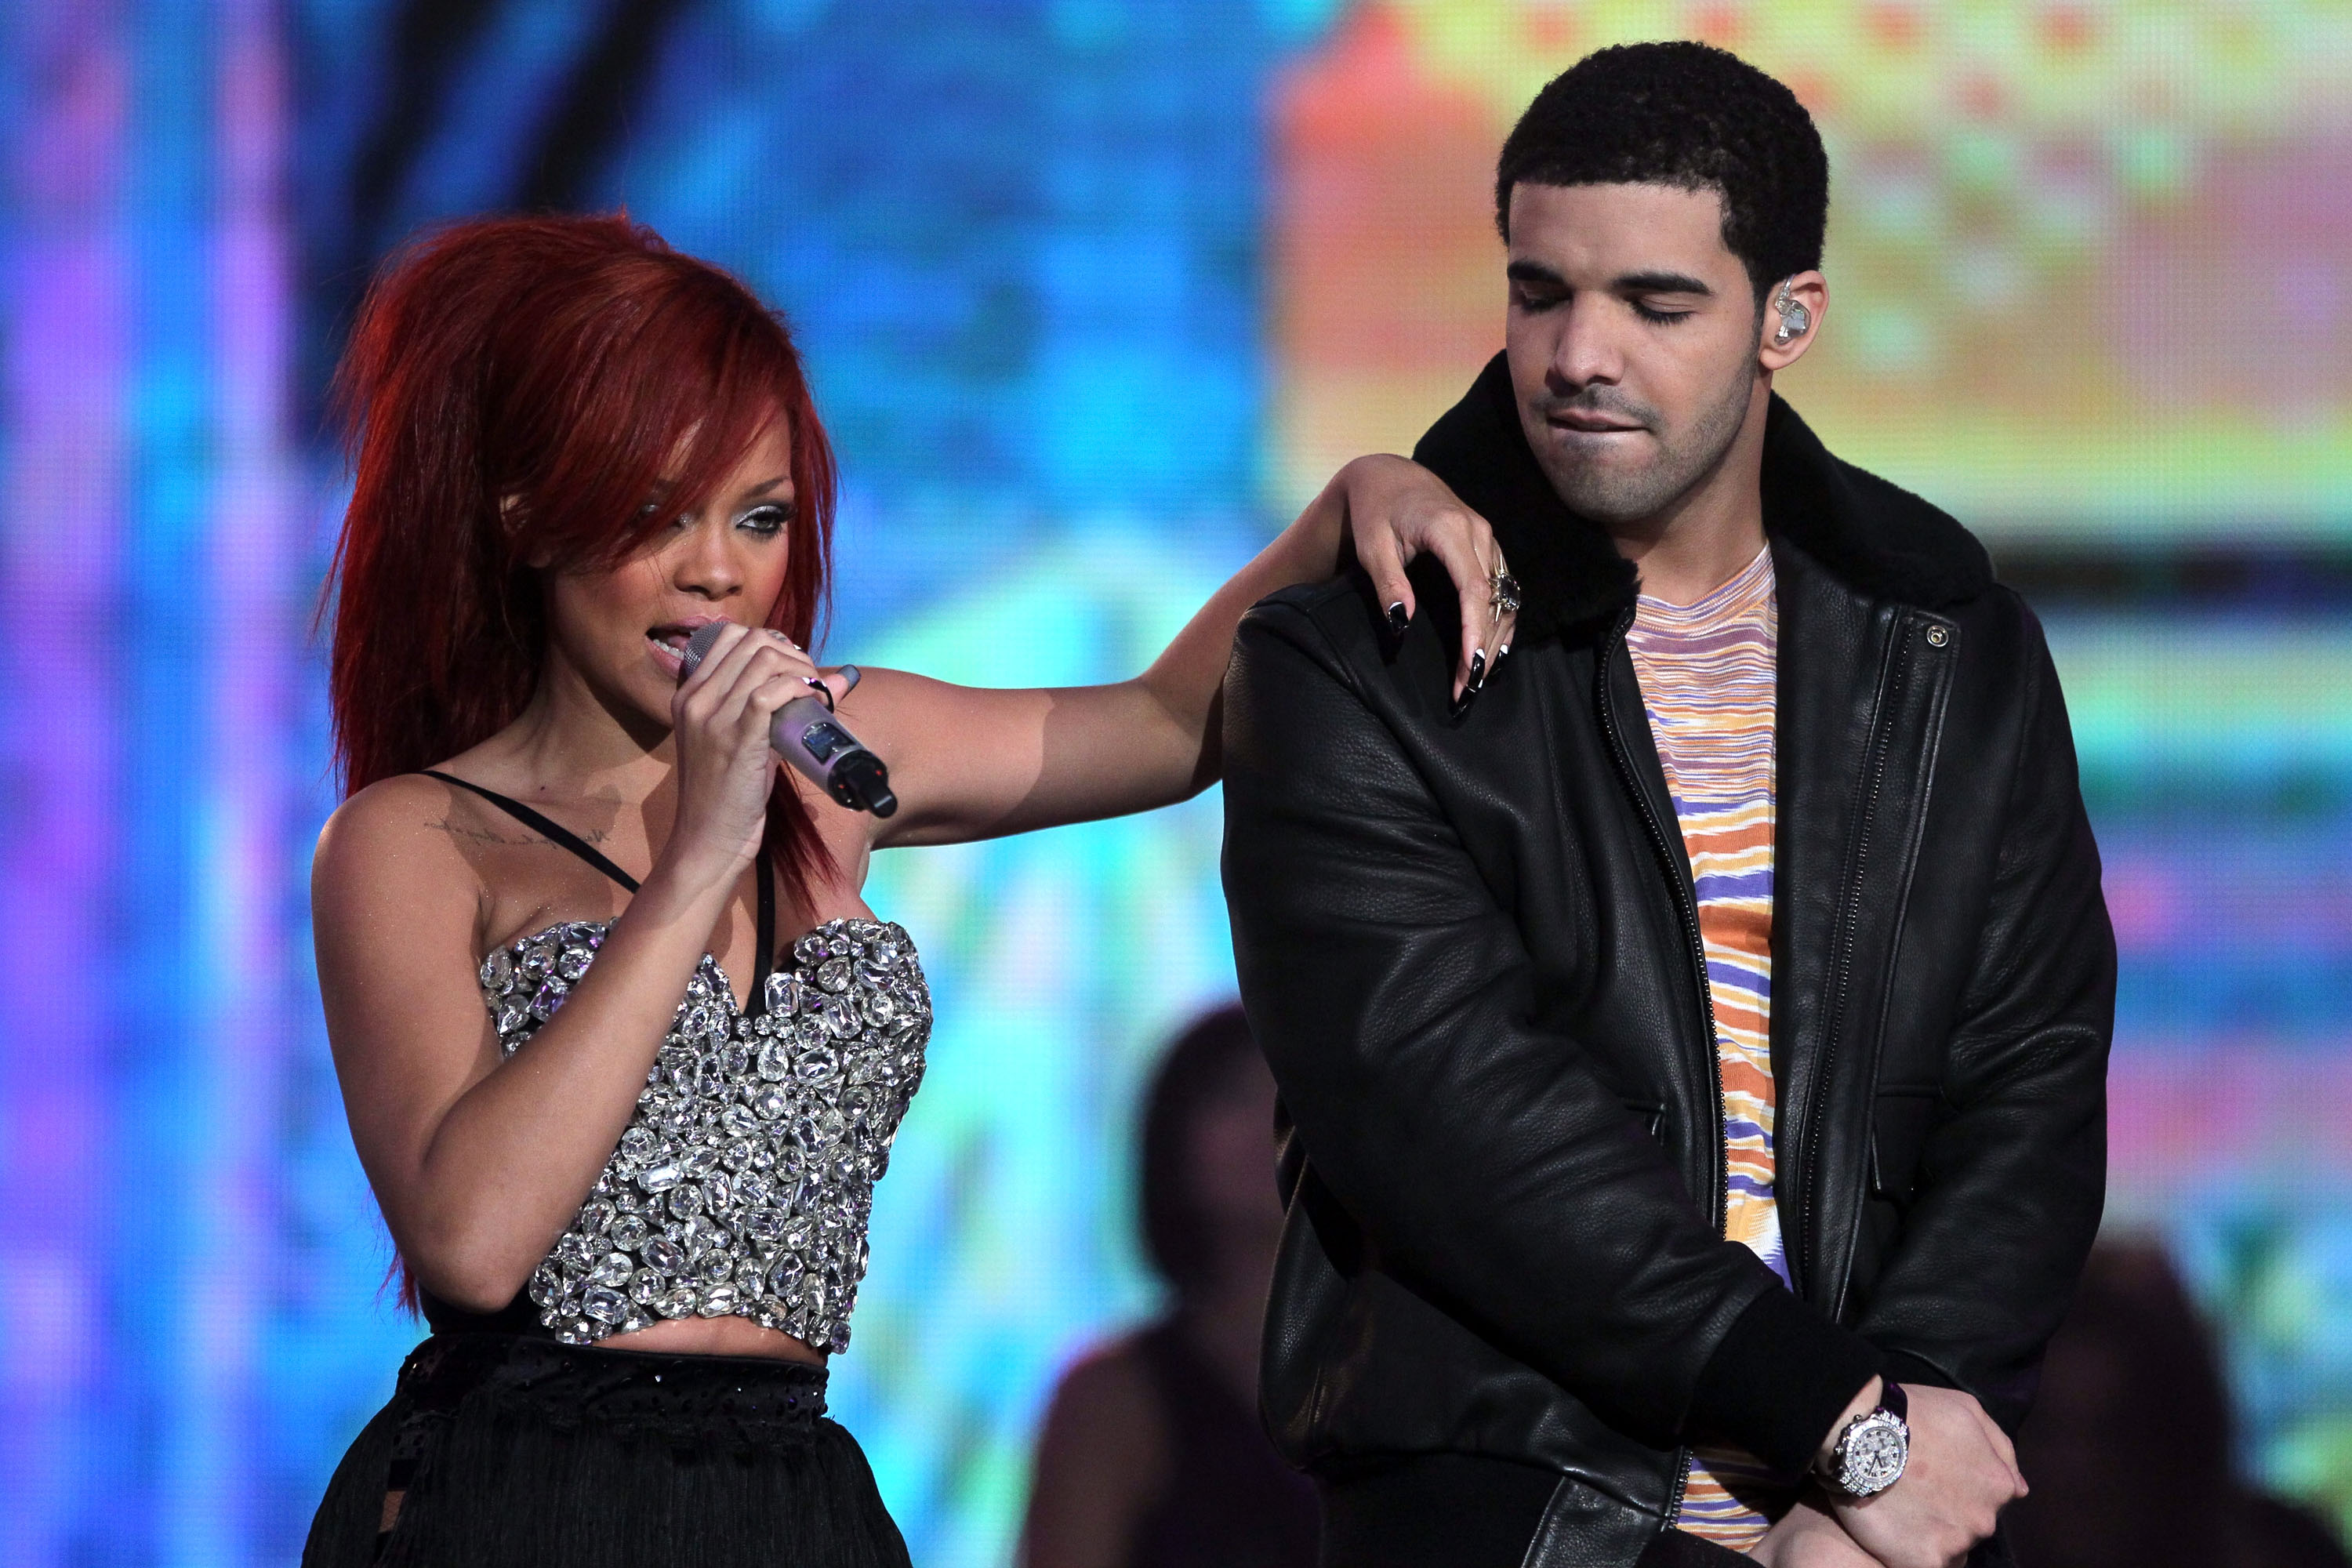 LOS ANGELES, CA - FEBRUARY 20: Singer Rihanna (L) and rapper Drake perform during the 2011 NBA All-Star game halftime show at Staples Center on February 20, 2011 in Los Angeles, California. NOTE TO USER: User expressly acknowledges and agrees that, by downloading and or using this photograph, User is consenting to the terms and conditions of the Getty Images License Agreement. (Photo by Jeff Gross/Getty Images)